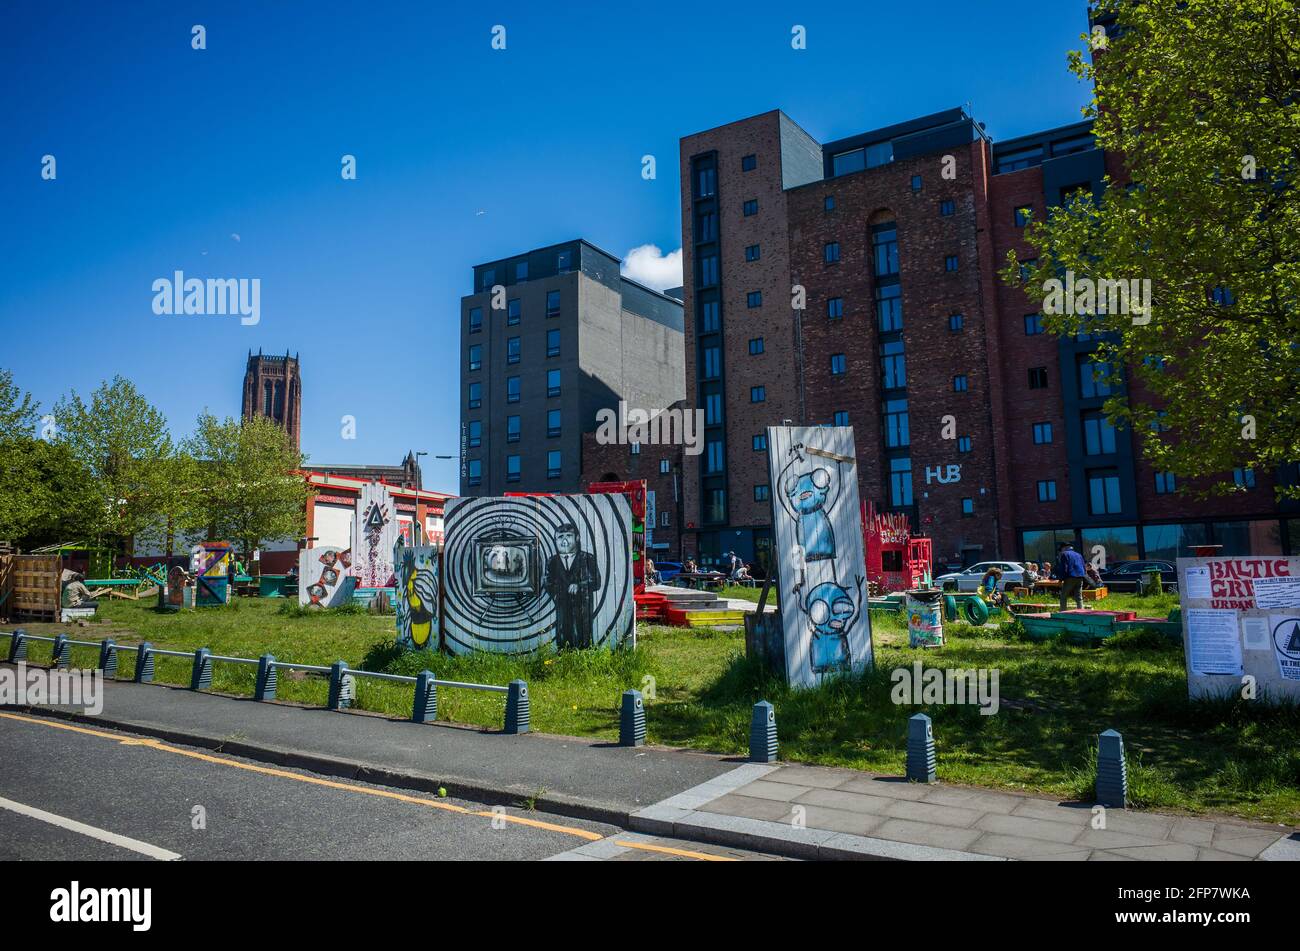 Liverpool May 19th  2021. The Baltic Green is a public space in Liverpool, the Baltic triangle, surrounded by apartments and creative businesses and b Stock Photo